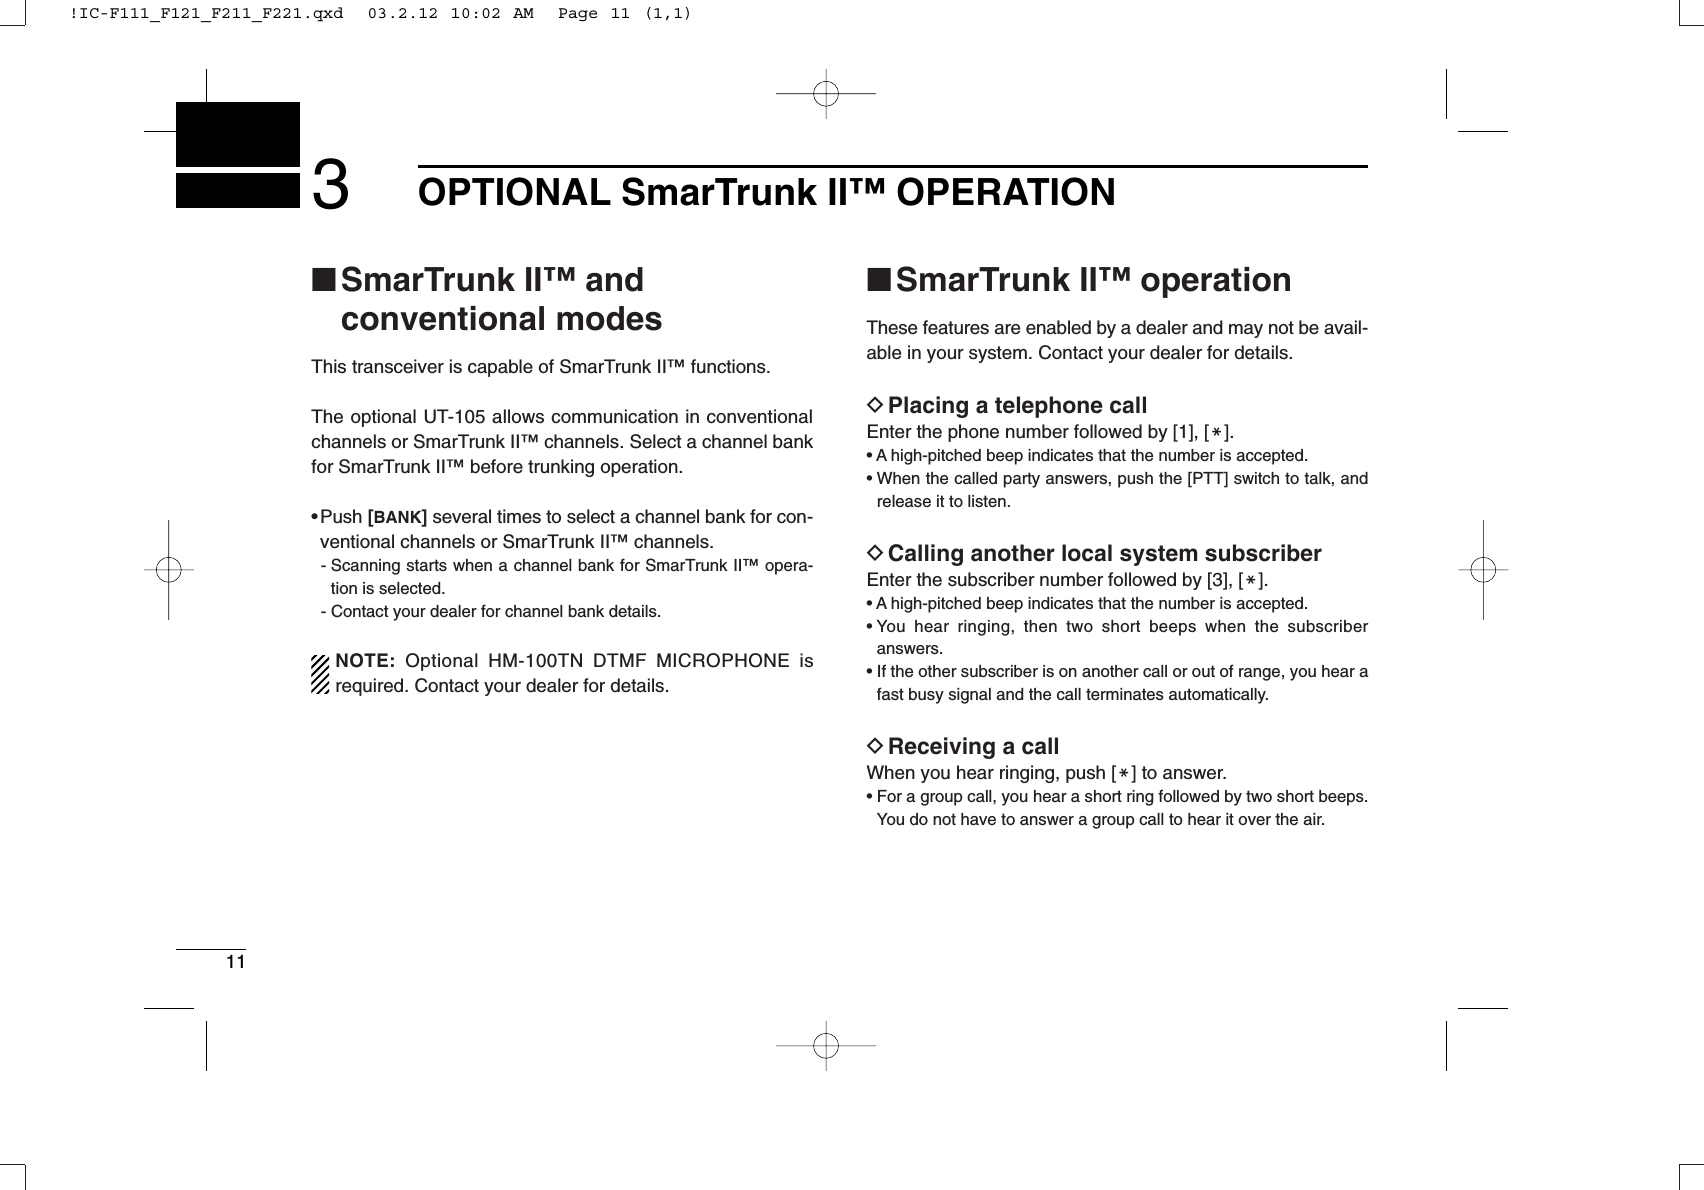 113OPTIONAL SmarTrunk II™OPERATION■SmarTrunk II™and conventional modesThis transceiver is capable of SmarTrunk II™ functions.The optional UT-105 allows communication in conventionalchannels or SmarTrunk II™ channels. Select a channel bankfor SmarTrunk II™ before trunking operation.• Push [BANK]several times to select a channel bank for con-ventional channels or SmarTrunk II™ channels.- Scanning starts when a channel bank for SmarTrunk II™ opera-tion is selected.- Contact your dealer for channel bank details.NOTE: Optional HM-100TN DTMF MICROPHONE isrequired. Contact your dealer for details.■SmarTrunk II™operationThese features are enabled by a dealer and may not be avail-able in your system. Contact your dealer for details.DPlacing a telephone callEnter the phone number followed by [1], [M].• A high-pitched beep indicates that the number is accepted.• When the called party answers, push the [PTT] switch to talk, andrelease it to listen.DCalling another local system subscriberEnter the subscriber number followed by [3], [M].• A high-pitched beep indicates that the number is accepted.• You hear ringing, then two short beeps when the subscriberanswers.• If the other subscriber is on another call or out of range, you hear afast busy signal and the call terminates automatically.DReceiving a callWhen you hear ringing, push [M] to answer.• For a group call, you hear a short ring followed by two short beeps.You do not have to answer a group call to hear it over the air.!IC-F111_F121_F211_F221.qxd  03.2.12 10:02 AM  Page 11 (1,1)